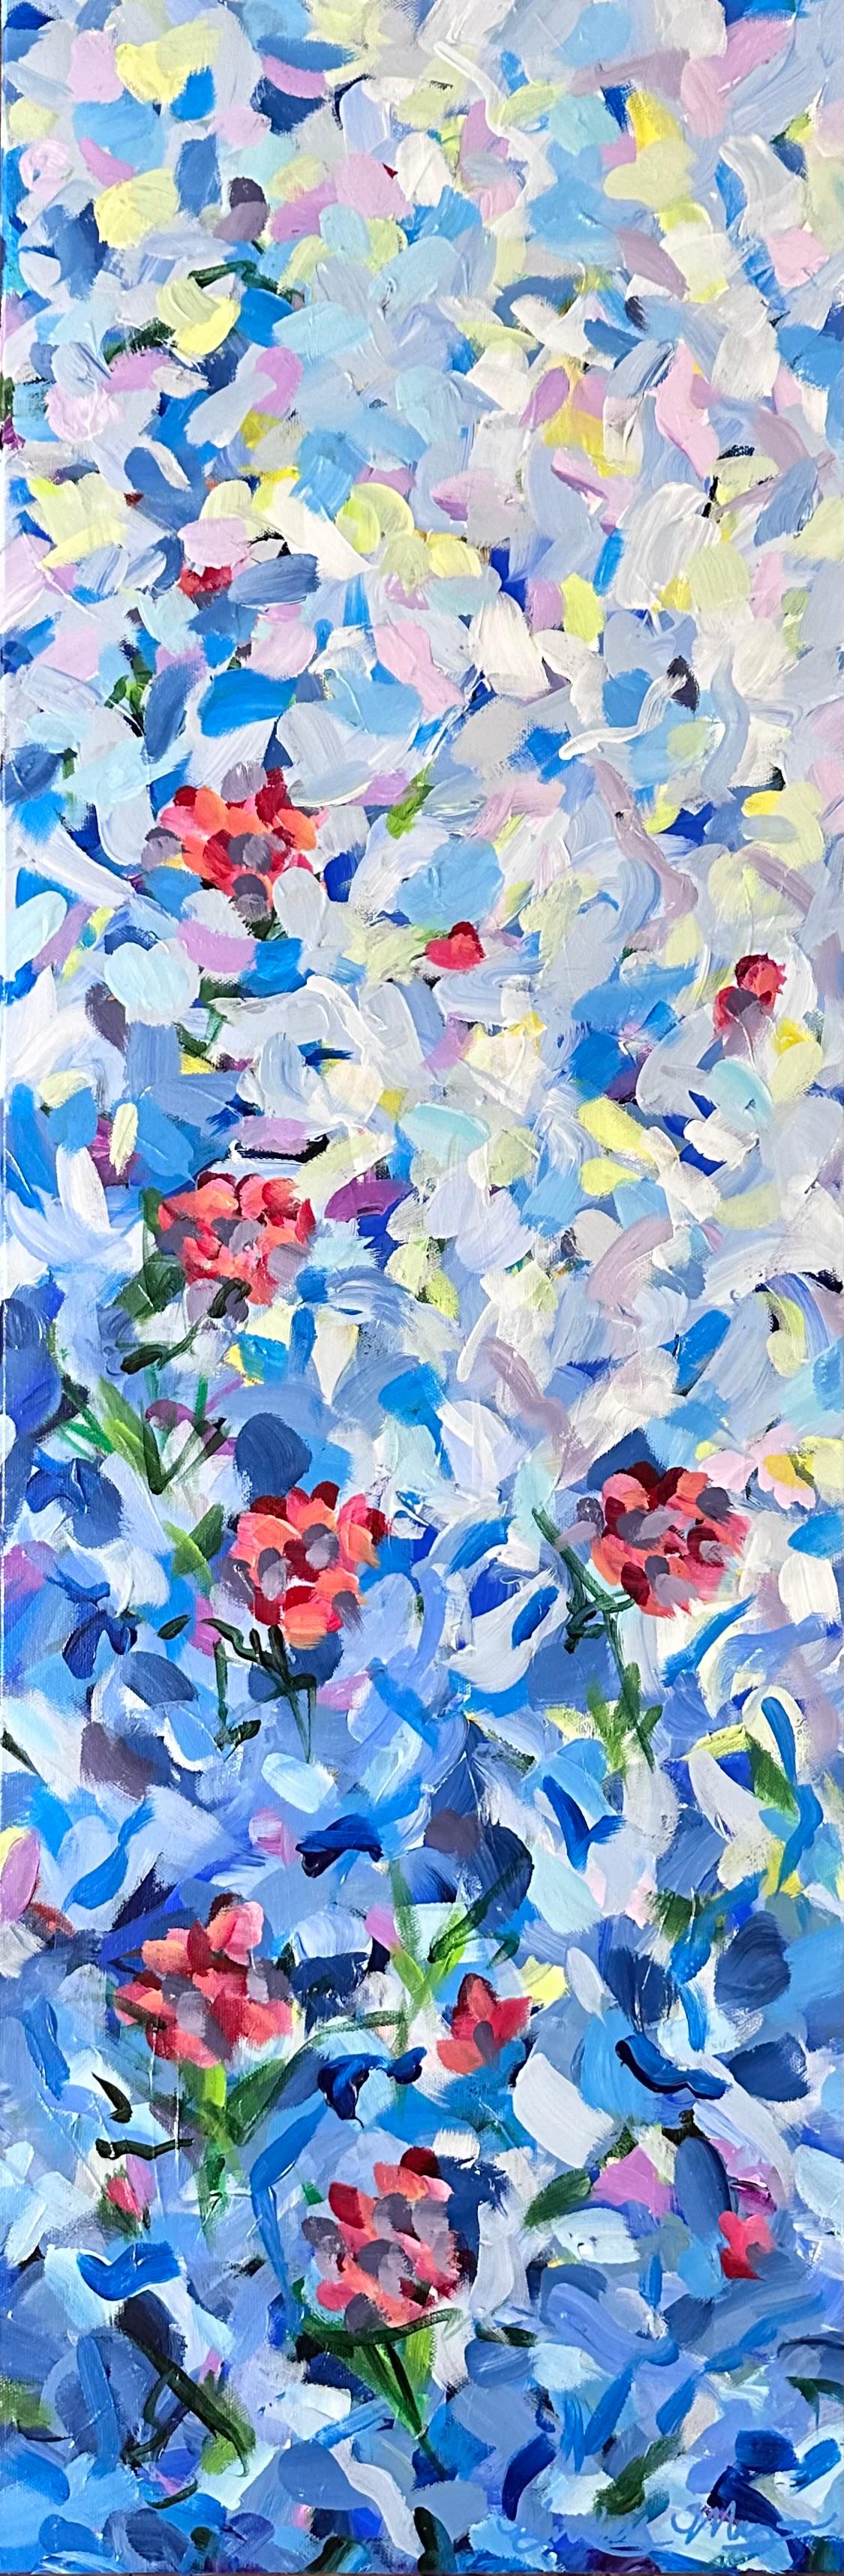 Golden Hour (Abstract, Flora, Floral, Garden, Sunset, Blue, Pink, Lilac) - Painting by Kimberly Marney